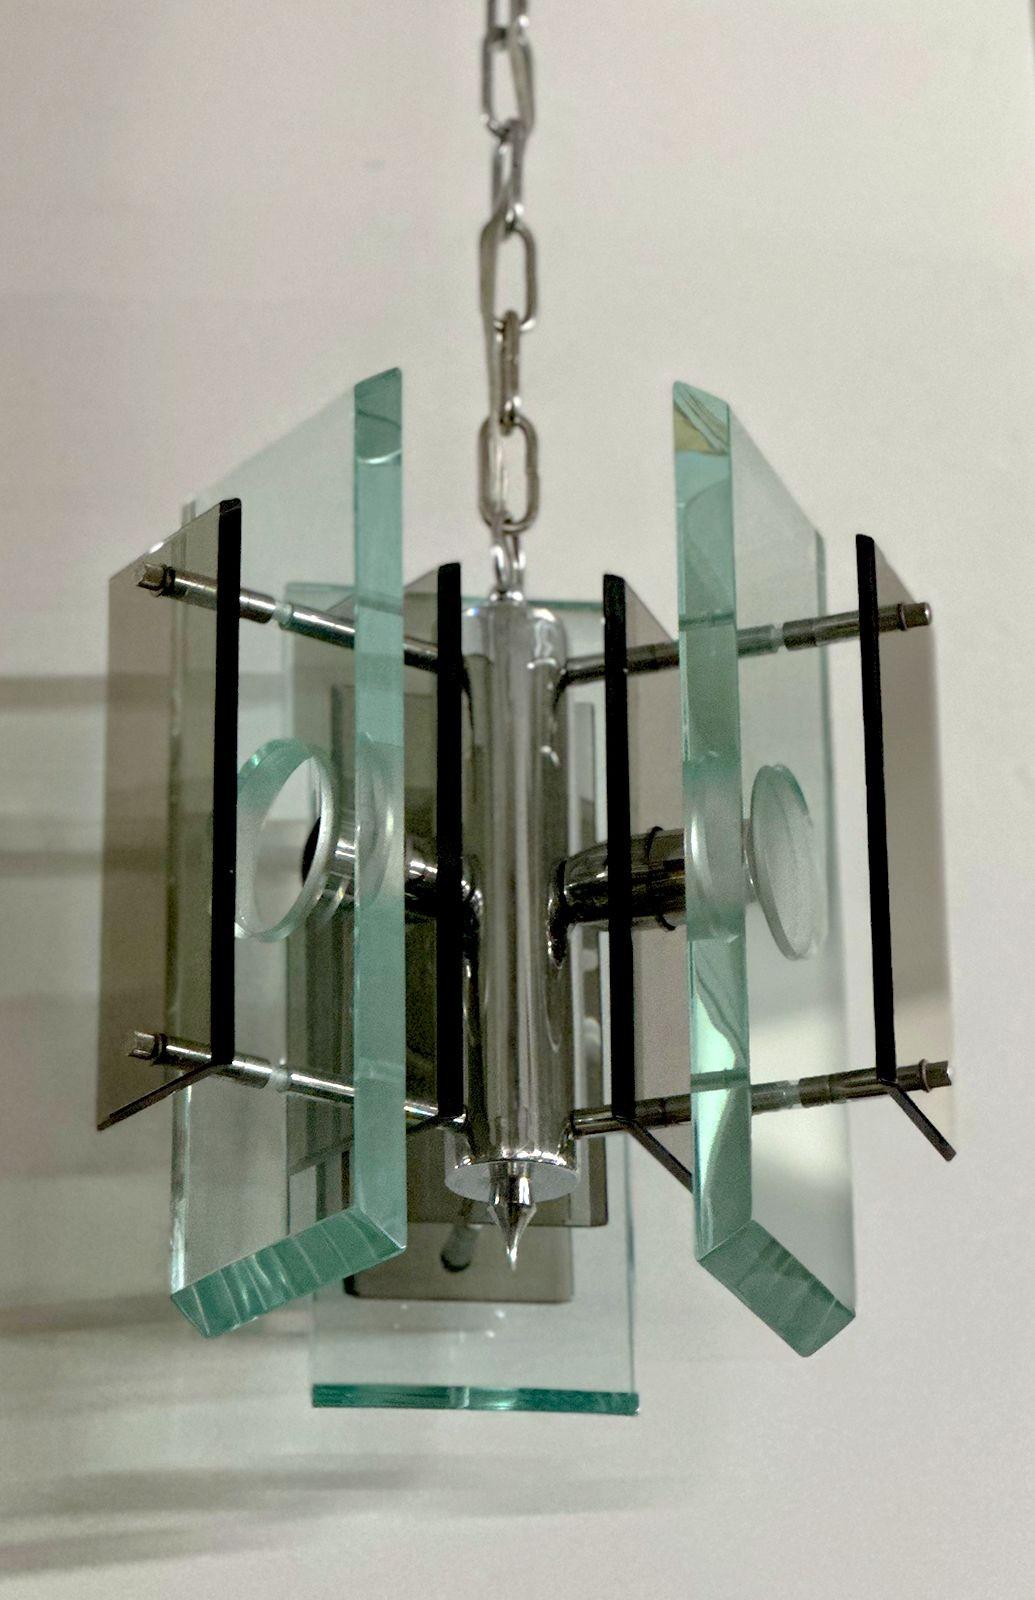 Beautiful vintage Italian pendant with clear and smoky Murano glass mounted on a chrome frame. Made in Italy, c. 1970's.
*Rewired to fit US lighting standards
*Chain can be adjusted to desired height.
Dimensions:
12